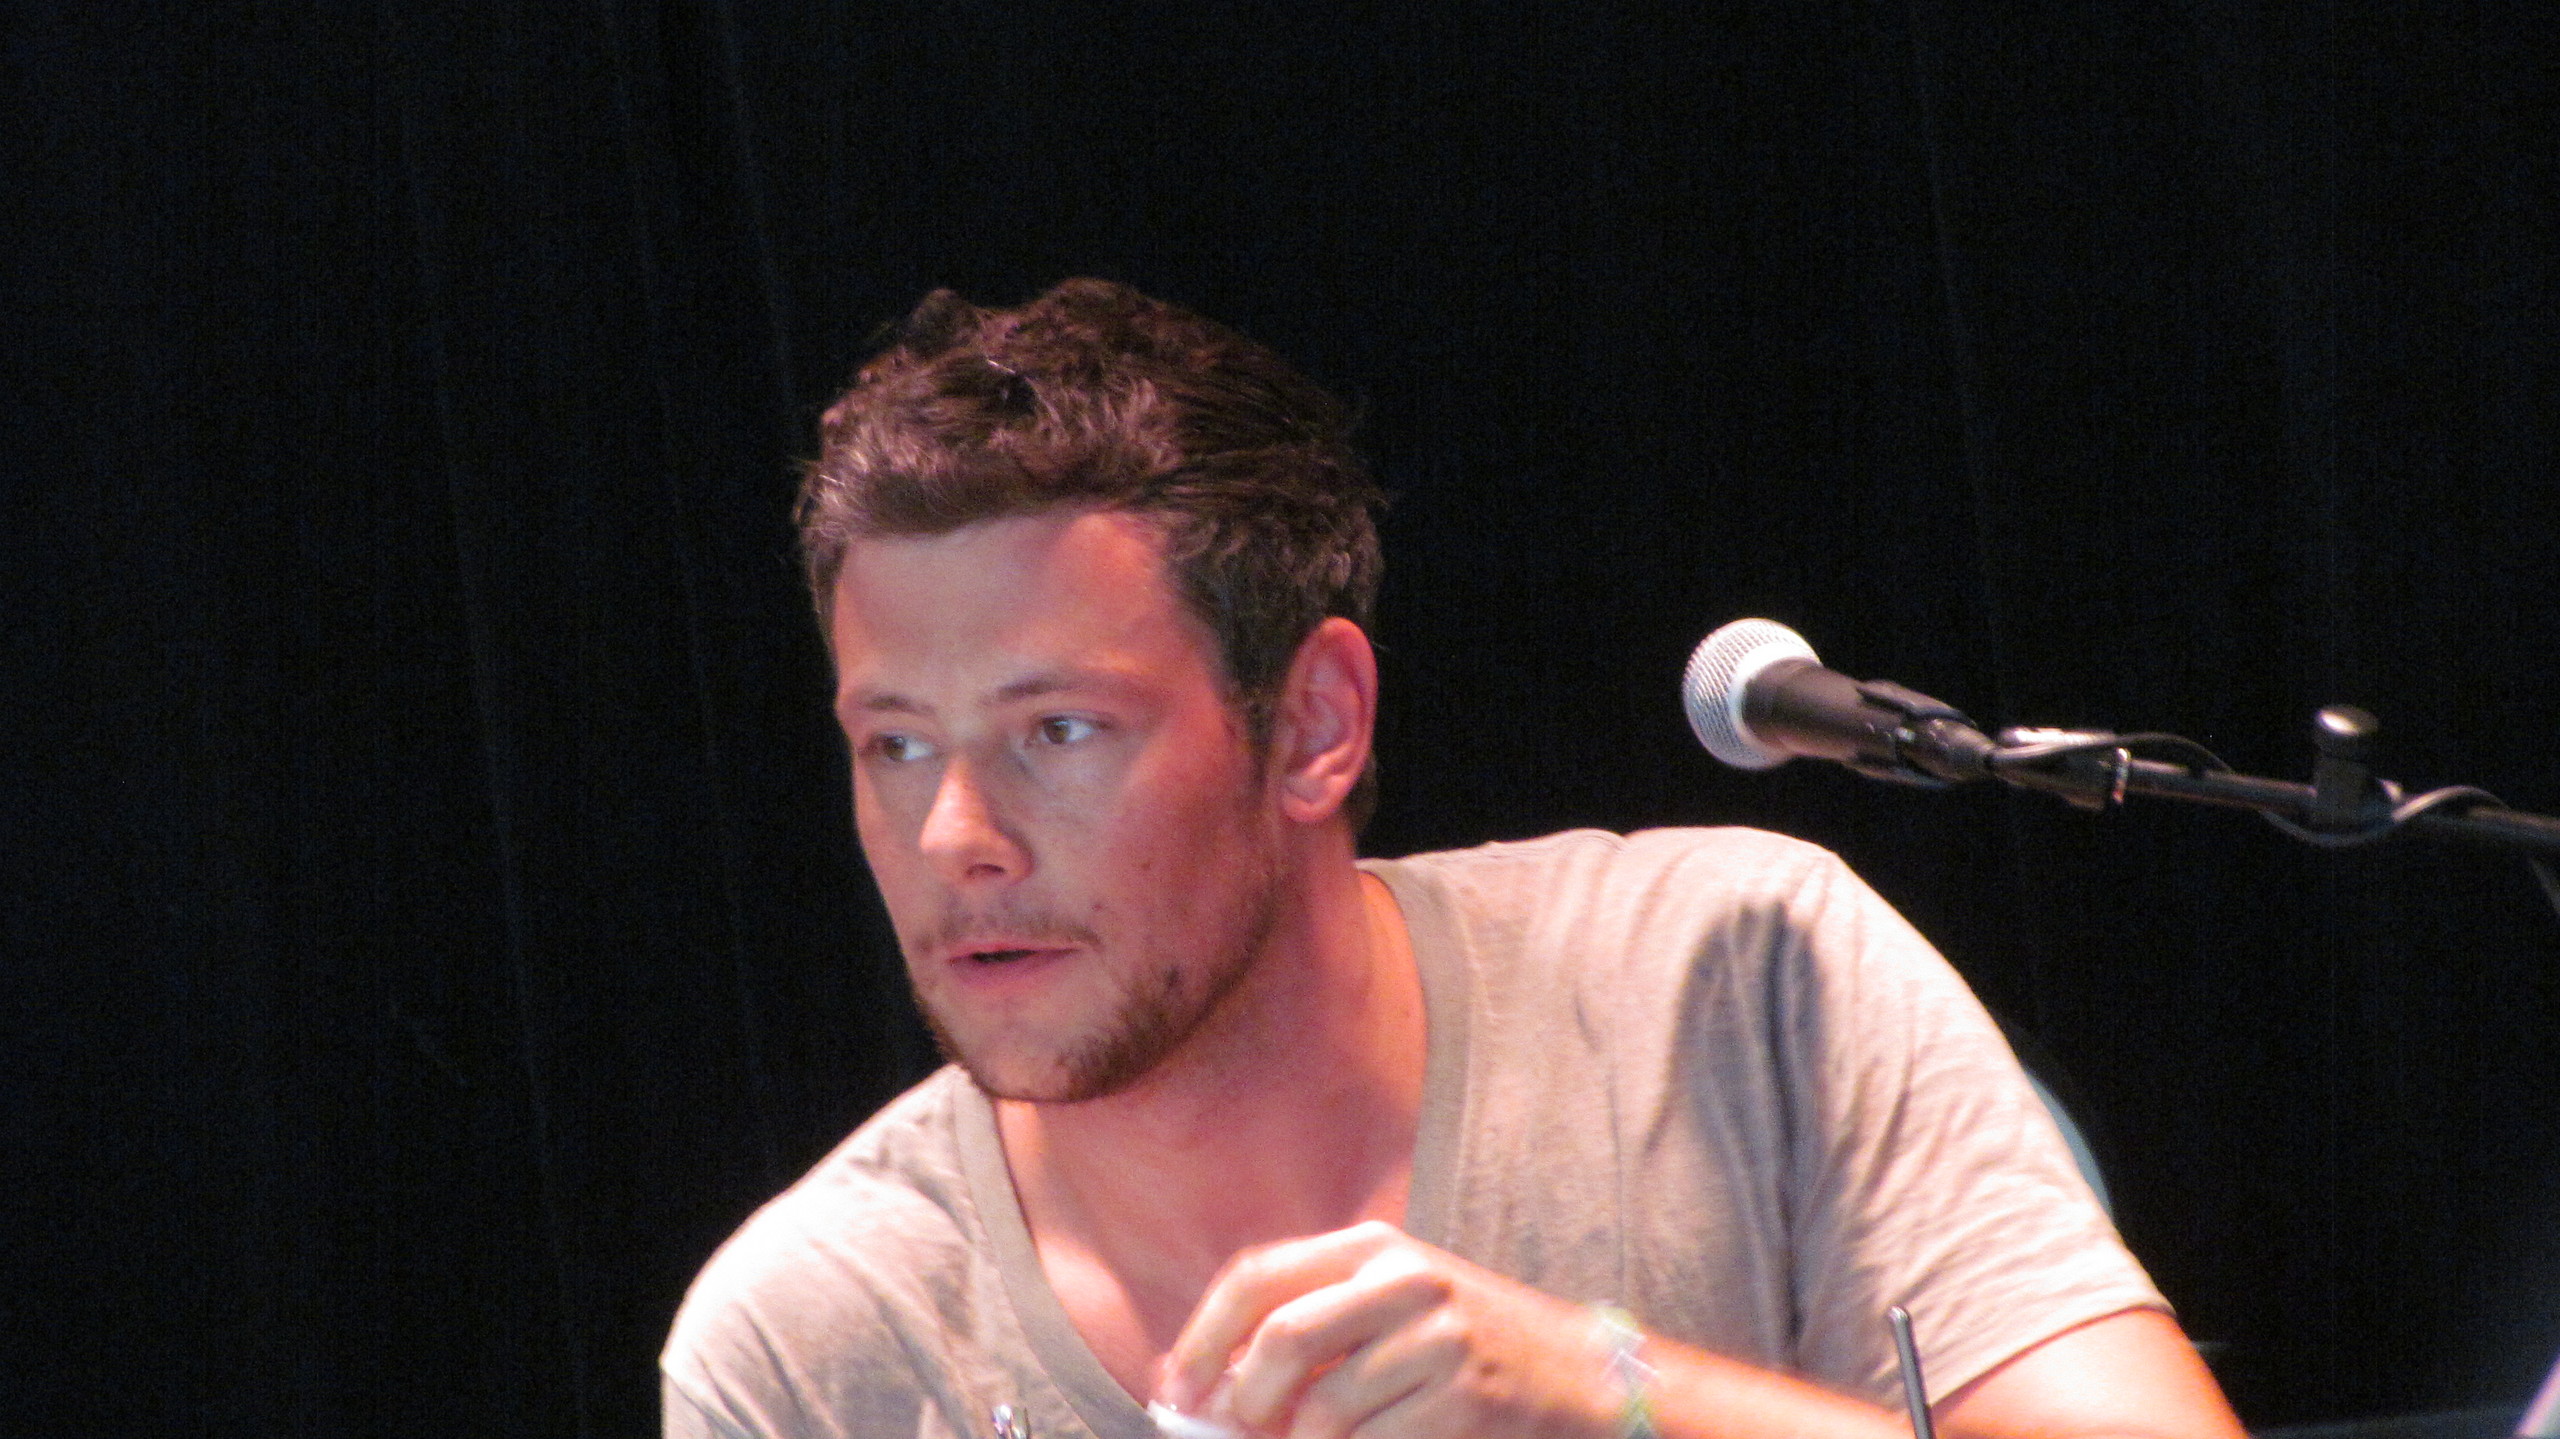 Cory Monteith Image At Hershey Park HD Wallpaper